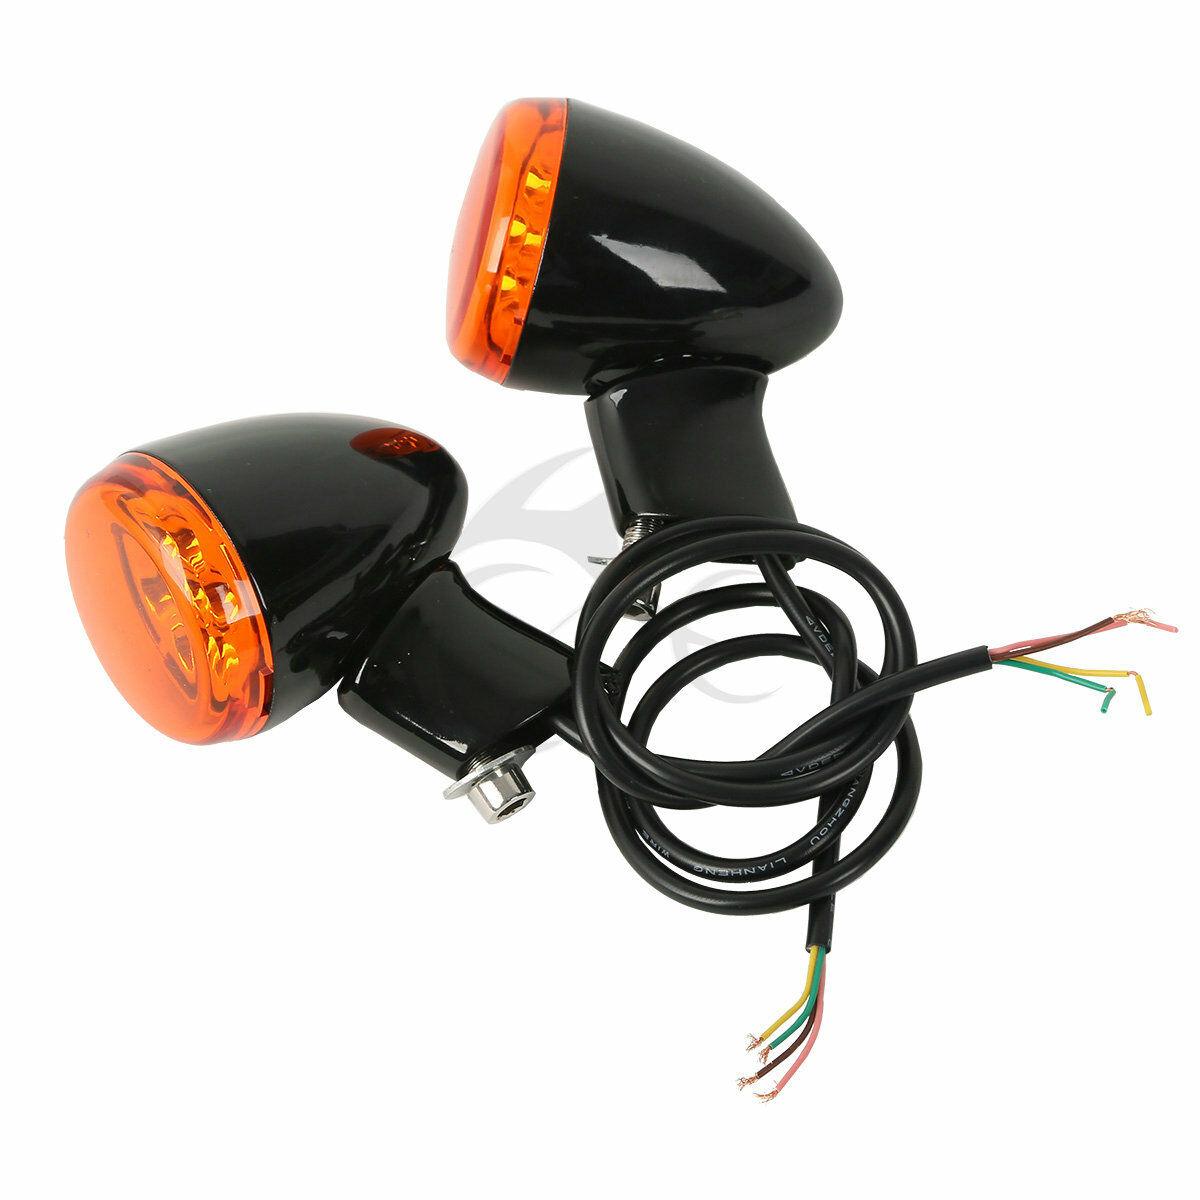 LED Rear Turn Signal Light Indicator Fit For Harley XL883 XL1200 Sportster 92-17 - Moto Life Products